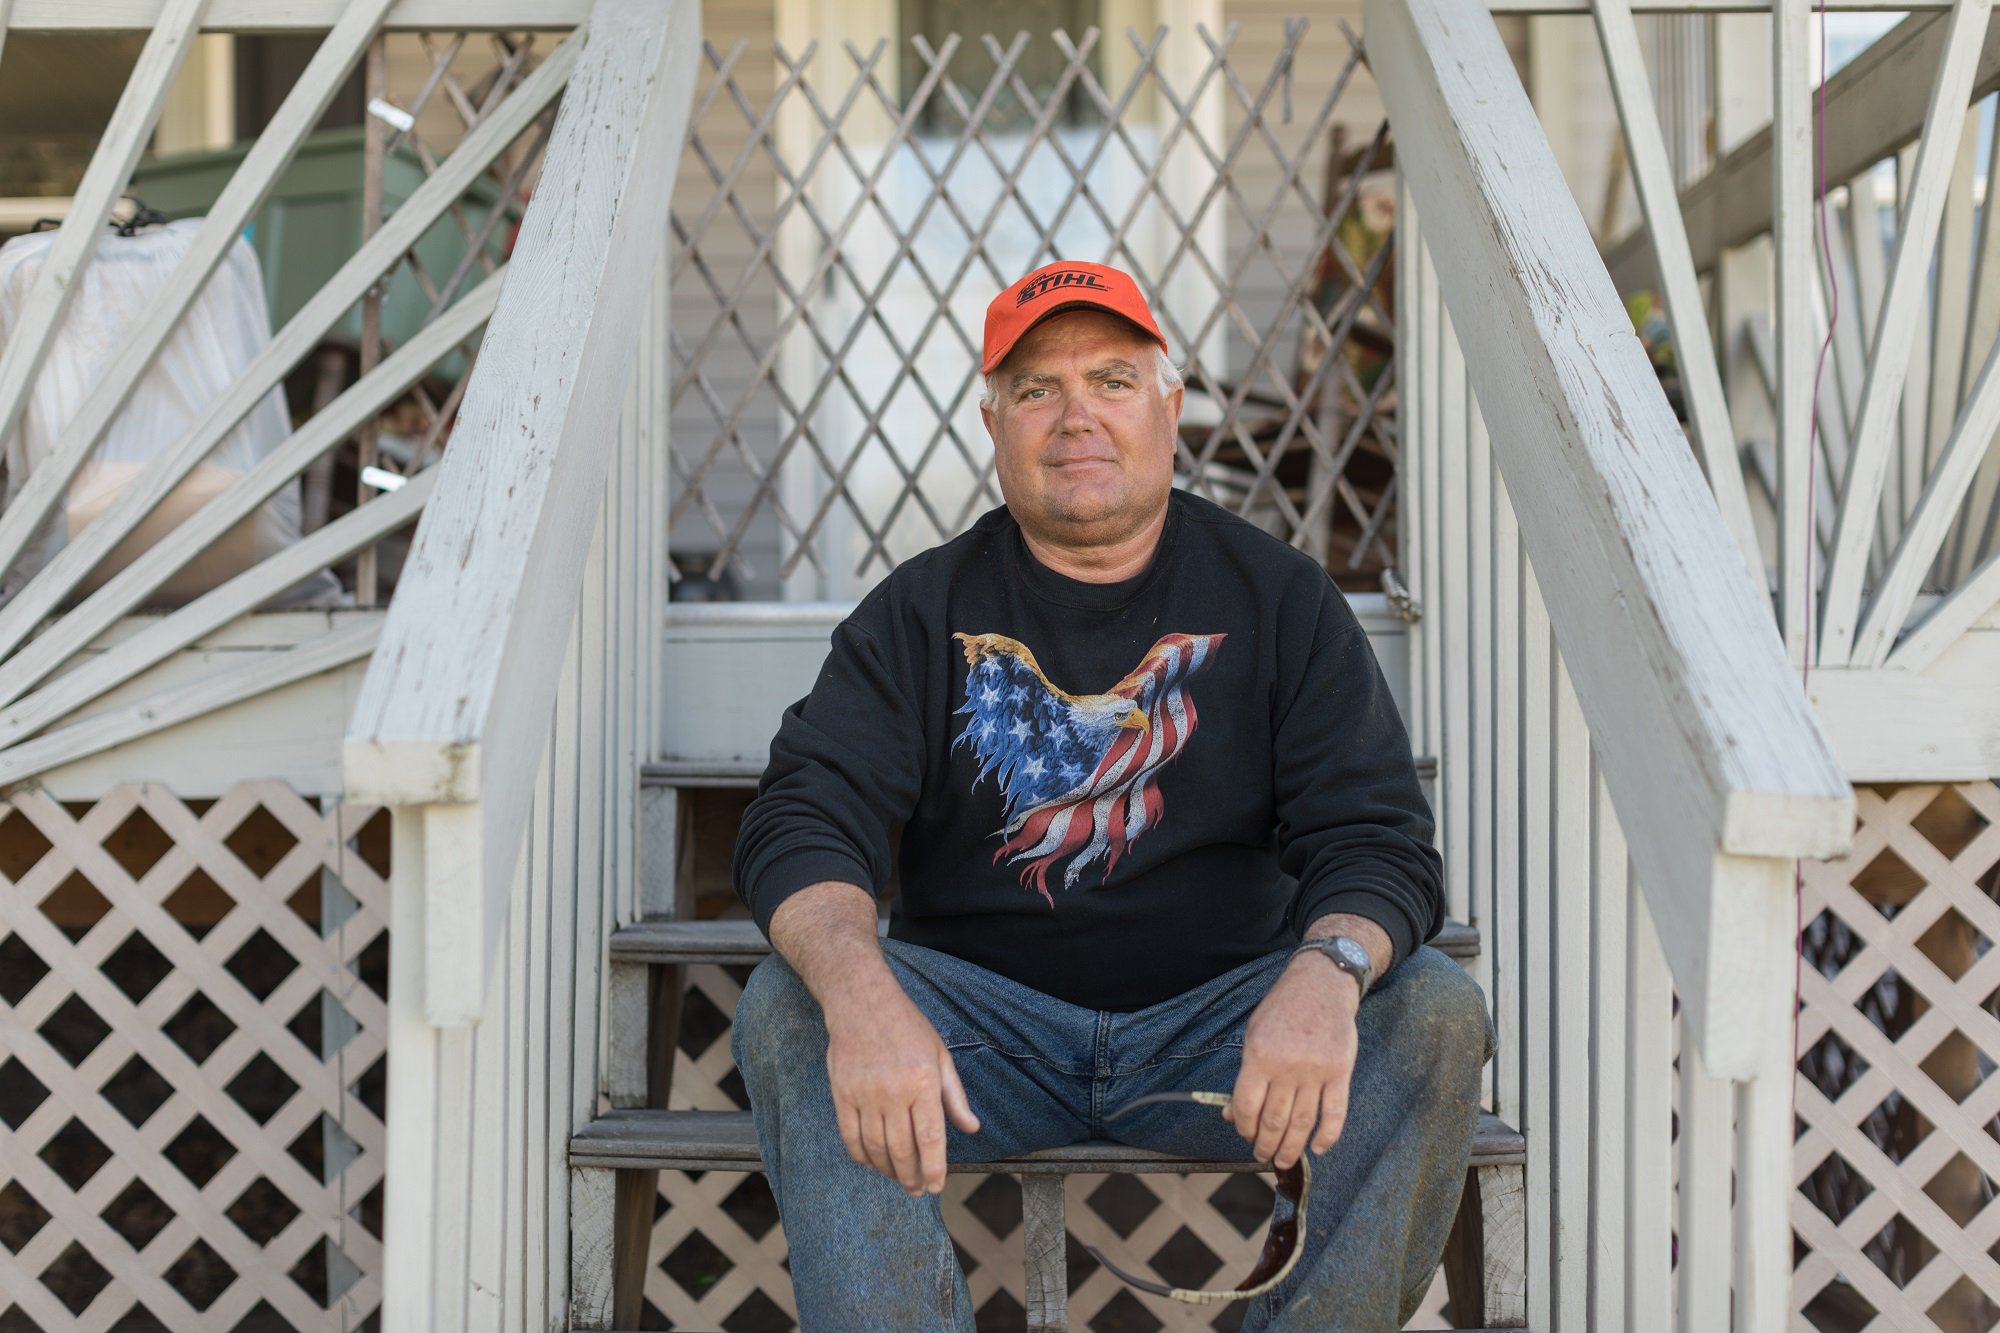 Photo: Mike, a native Virginian, sits on a porch across the street from Princeton Masjid, home of the Islamic Society of Appalachian Region in Roanoke.